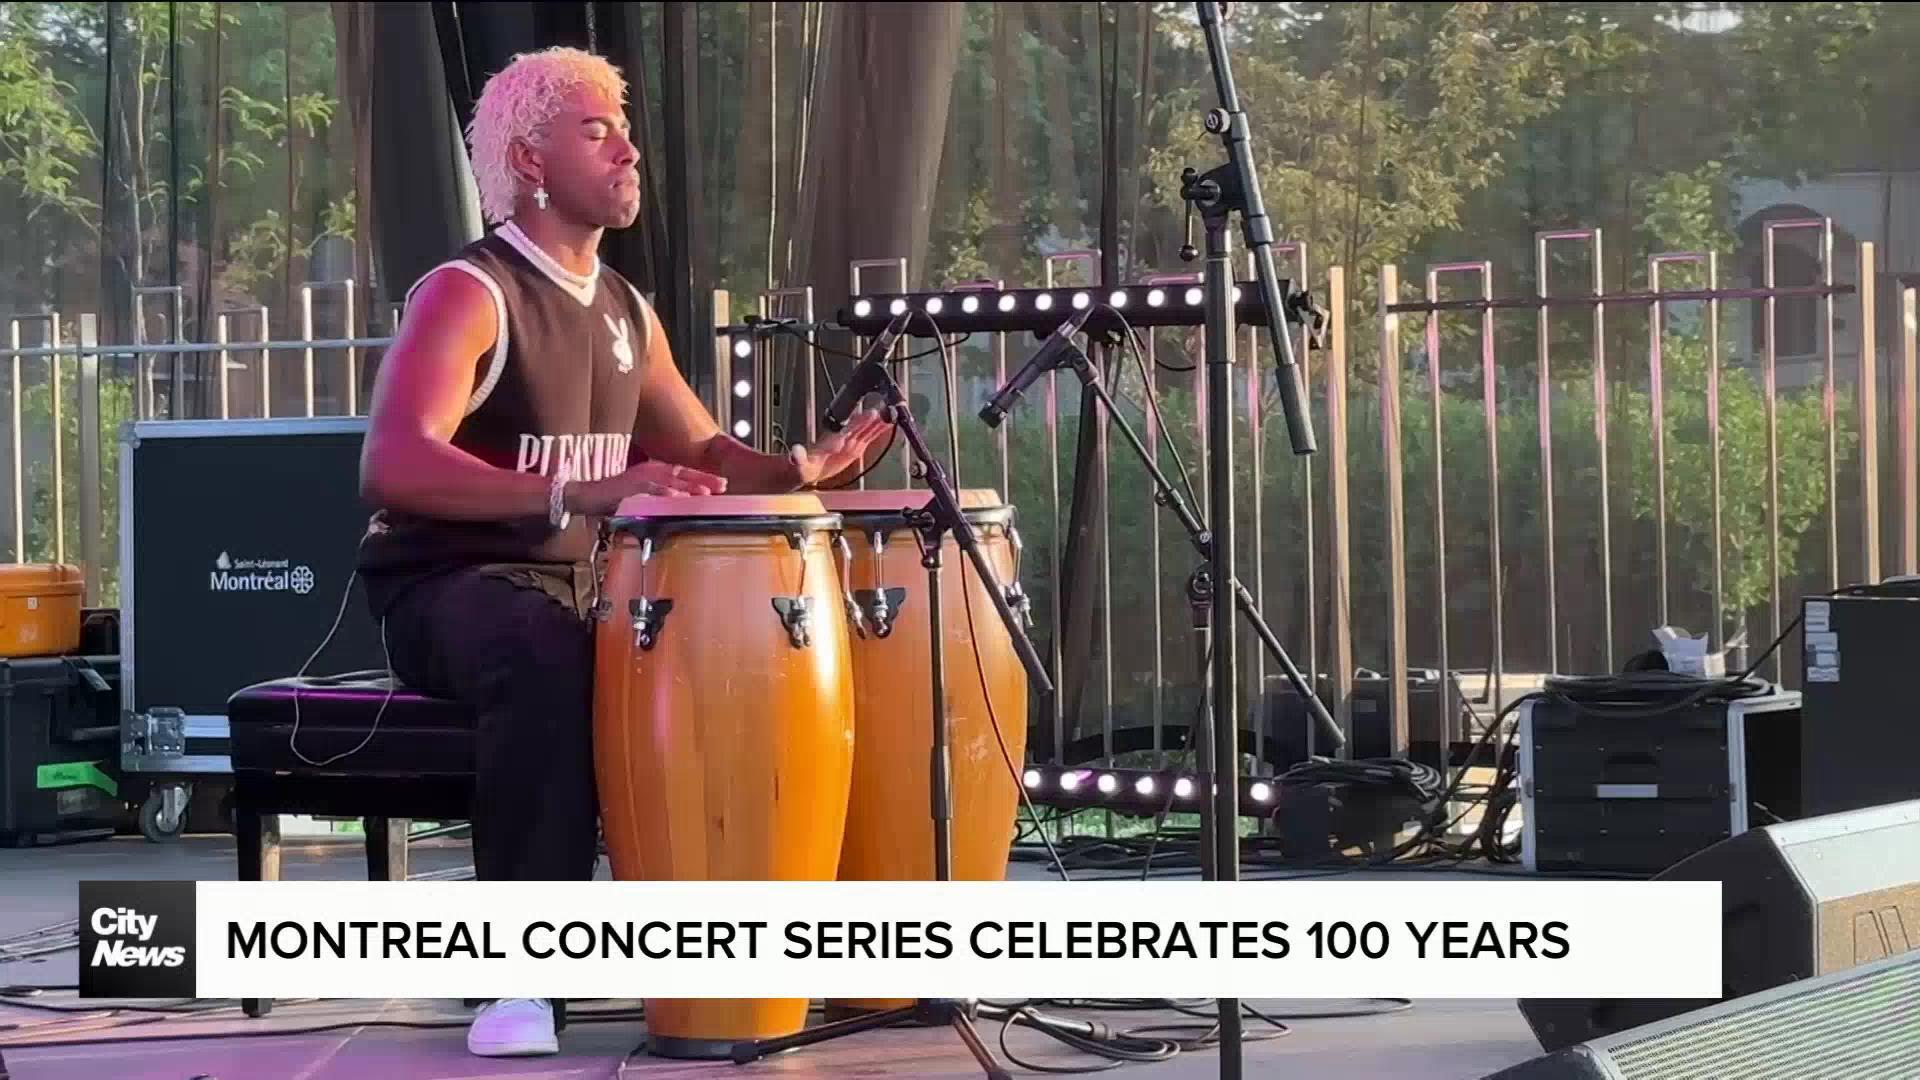 Montreal's free summer concert series celebrates its 100th year